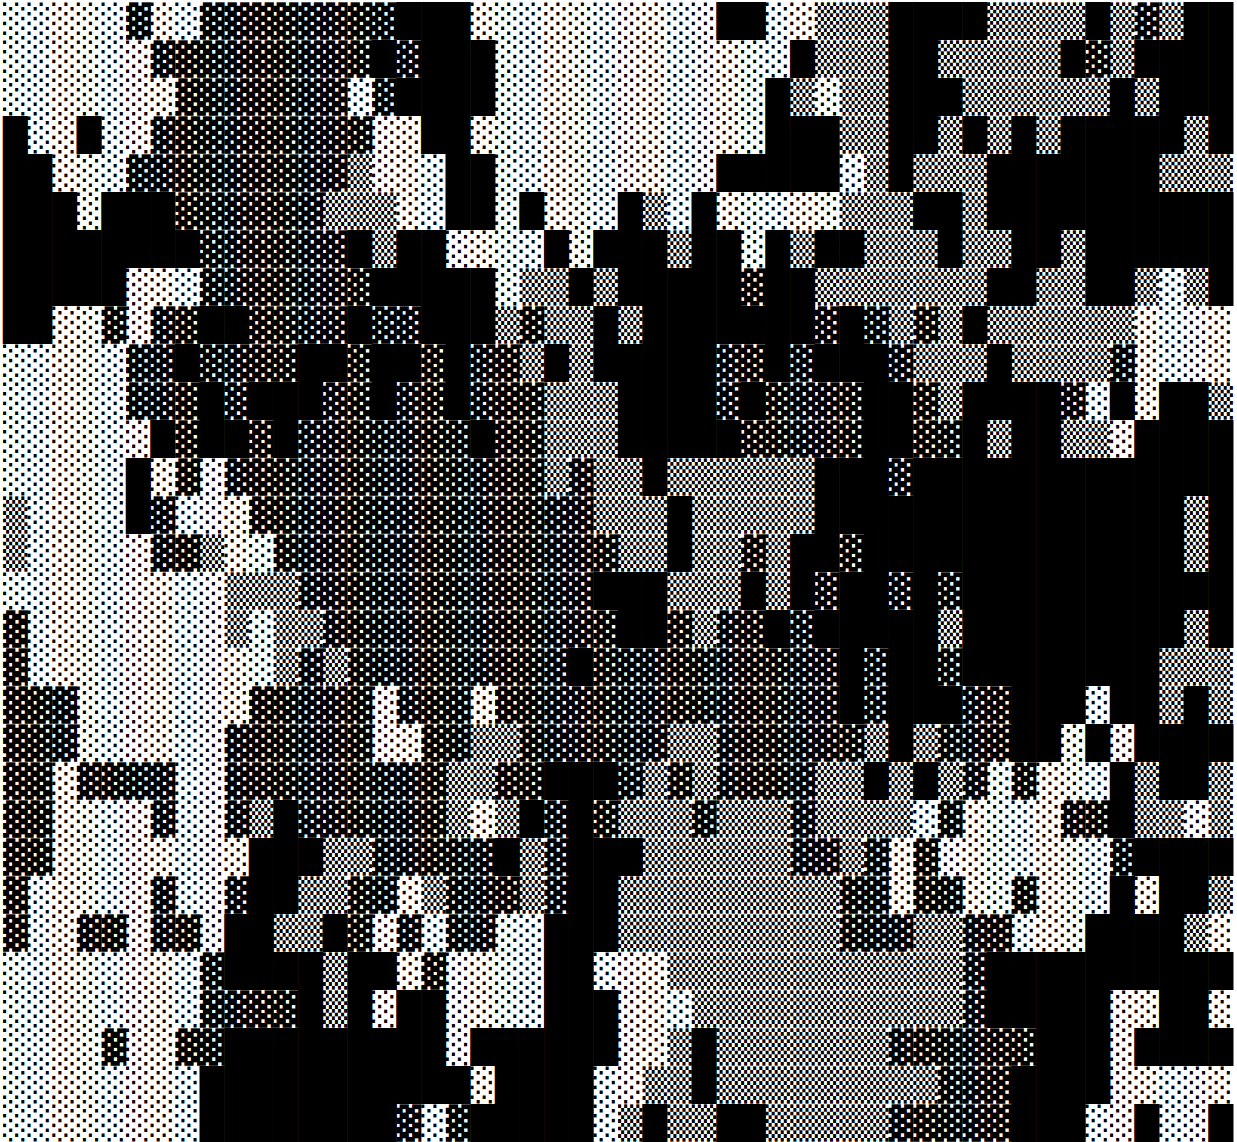 Pixellated image of black, white, and grey tiles